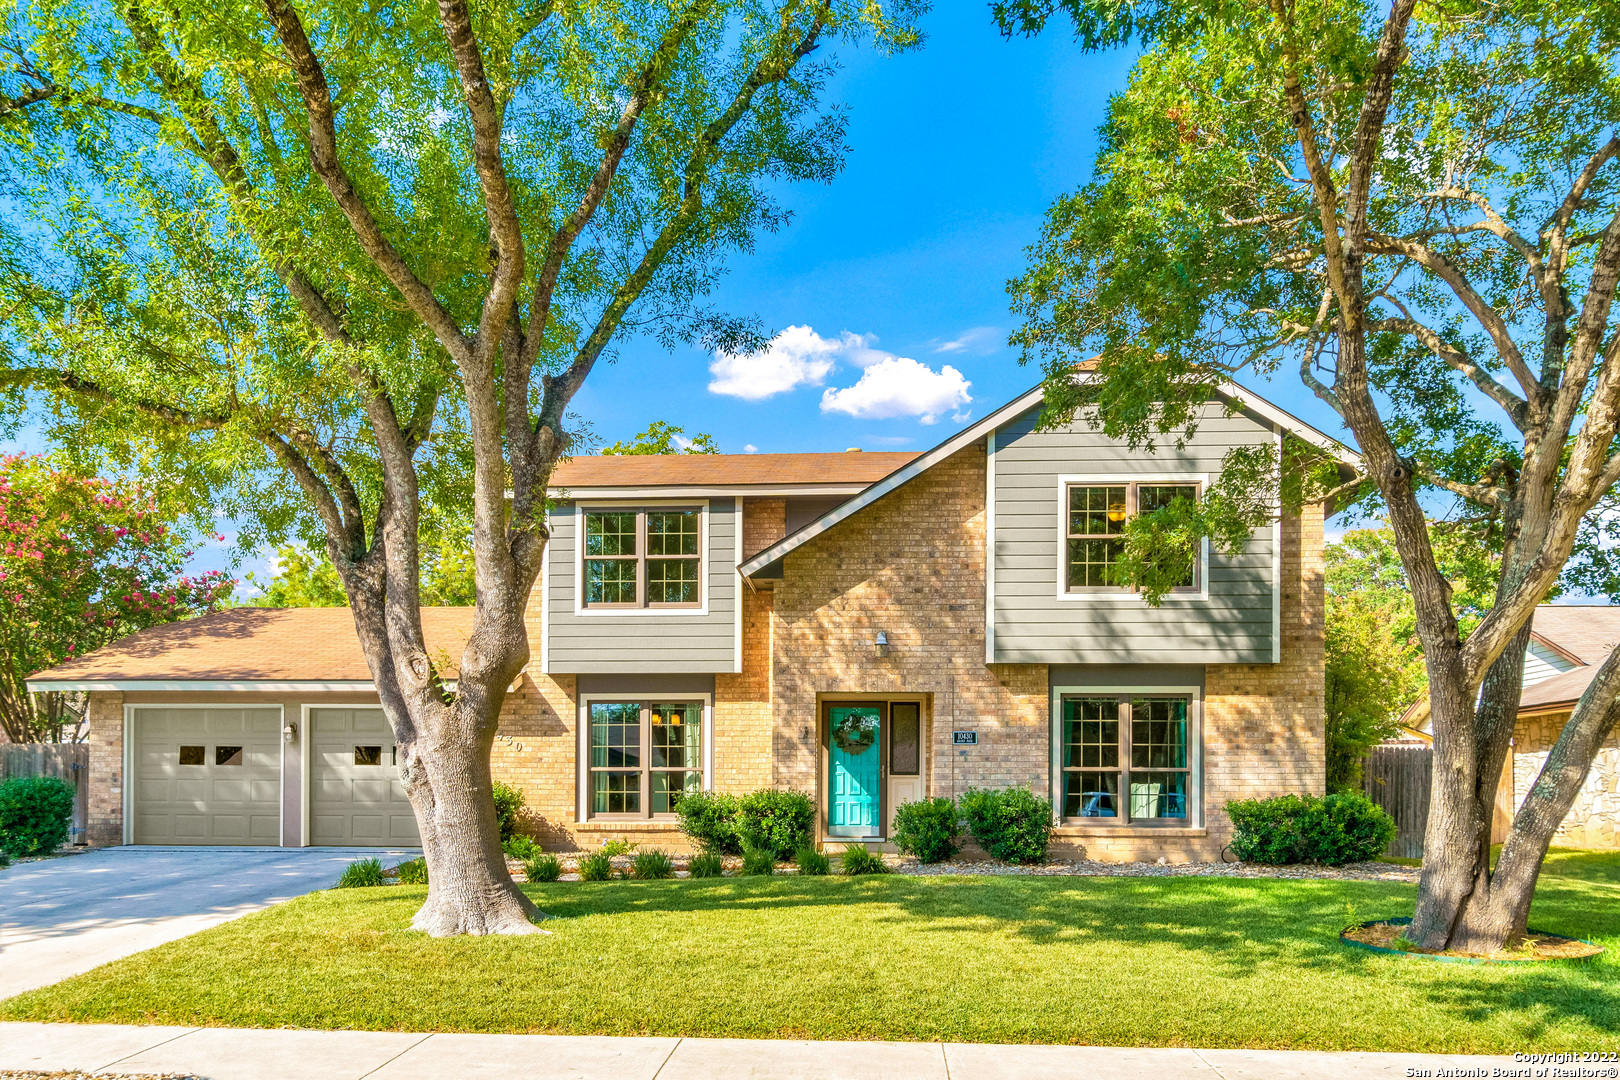 Enjoy comfortable and convenient living in this attractive 2-story, 4 bedroom, 2 1/2 bath home, perfect for a family with children, and just a few houses away from Royal Ridge Elementary School. This home is in the quiet Royal Ridge neighborhood, convenient to IH 35, Loop 410, Loop 1604, and Wurzbach Parkway, with easy access to both Randolph Air Force Base and Ft. Sam Houston. The neighborhood itself has 5 main exits and wide, tree-lined streets. This well-maintained Sitterle home has a recently renovated exterior with an insulated garage that is not the focal point of the home. All windows have been replaced with Andersen windows for superior insulation and ease of cleaning. The interior of the home sports large bedrooms and updated bathrooms and kitchen with stainless steel appliances. Relax anytime of the day under the covered patio overlooking a large, fenced backyard. The property has 4 mature trees and a complete sprinkler system. Within 2 blocks is the Royal Ridge Recreational Club with tennis courts, a pool, and clubhouse that is available for rent. Don't miss out on this amazing opportunity to own an idyllic home where your family can make memories to last a lifetime.